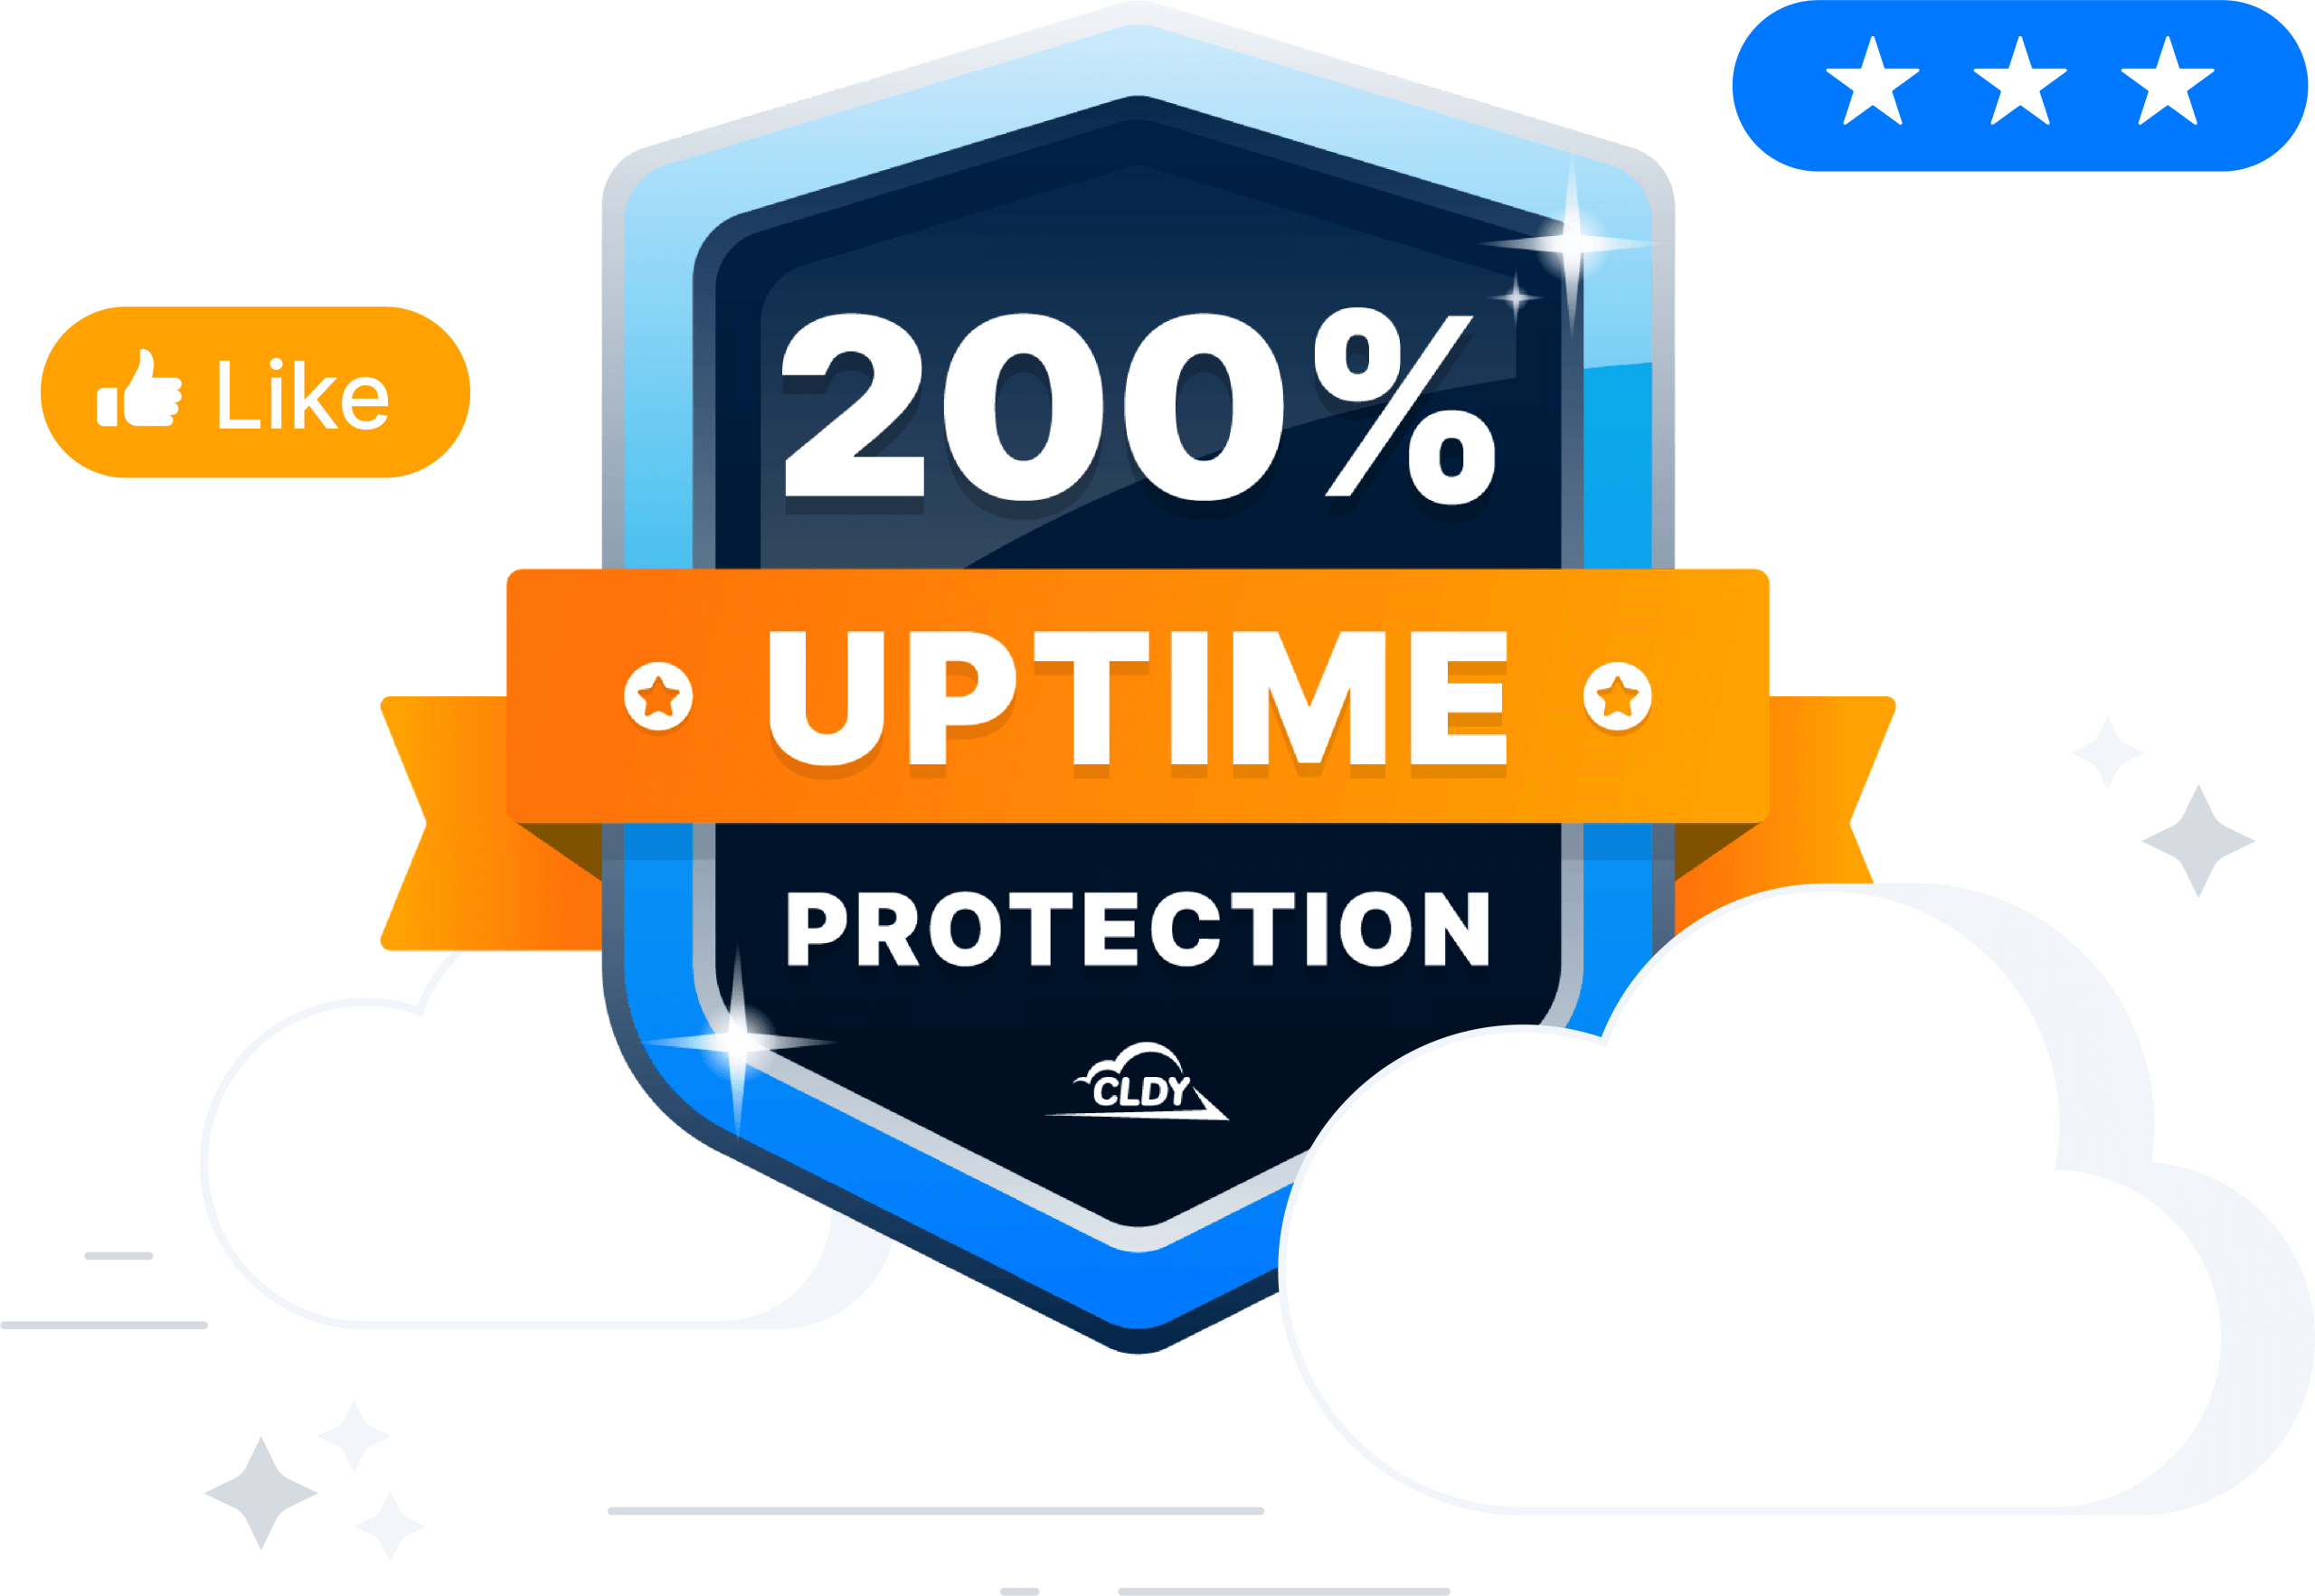 Uptime Protection